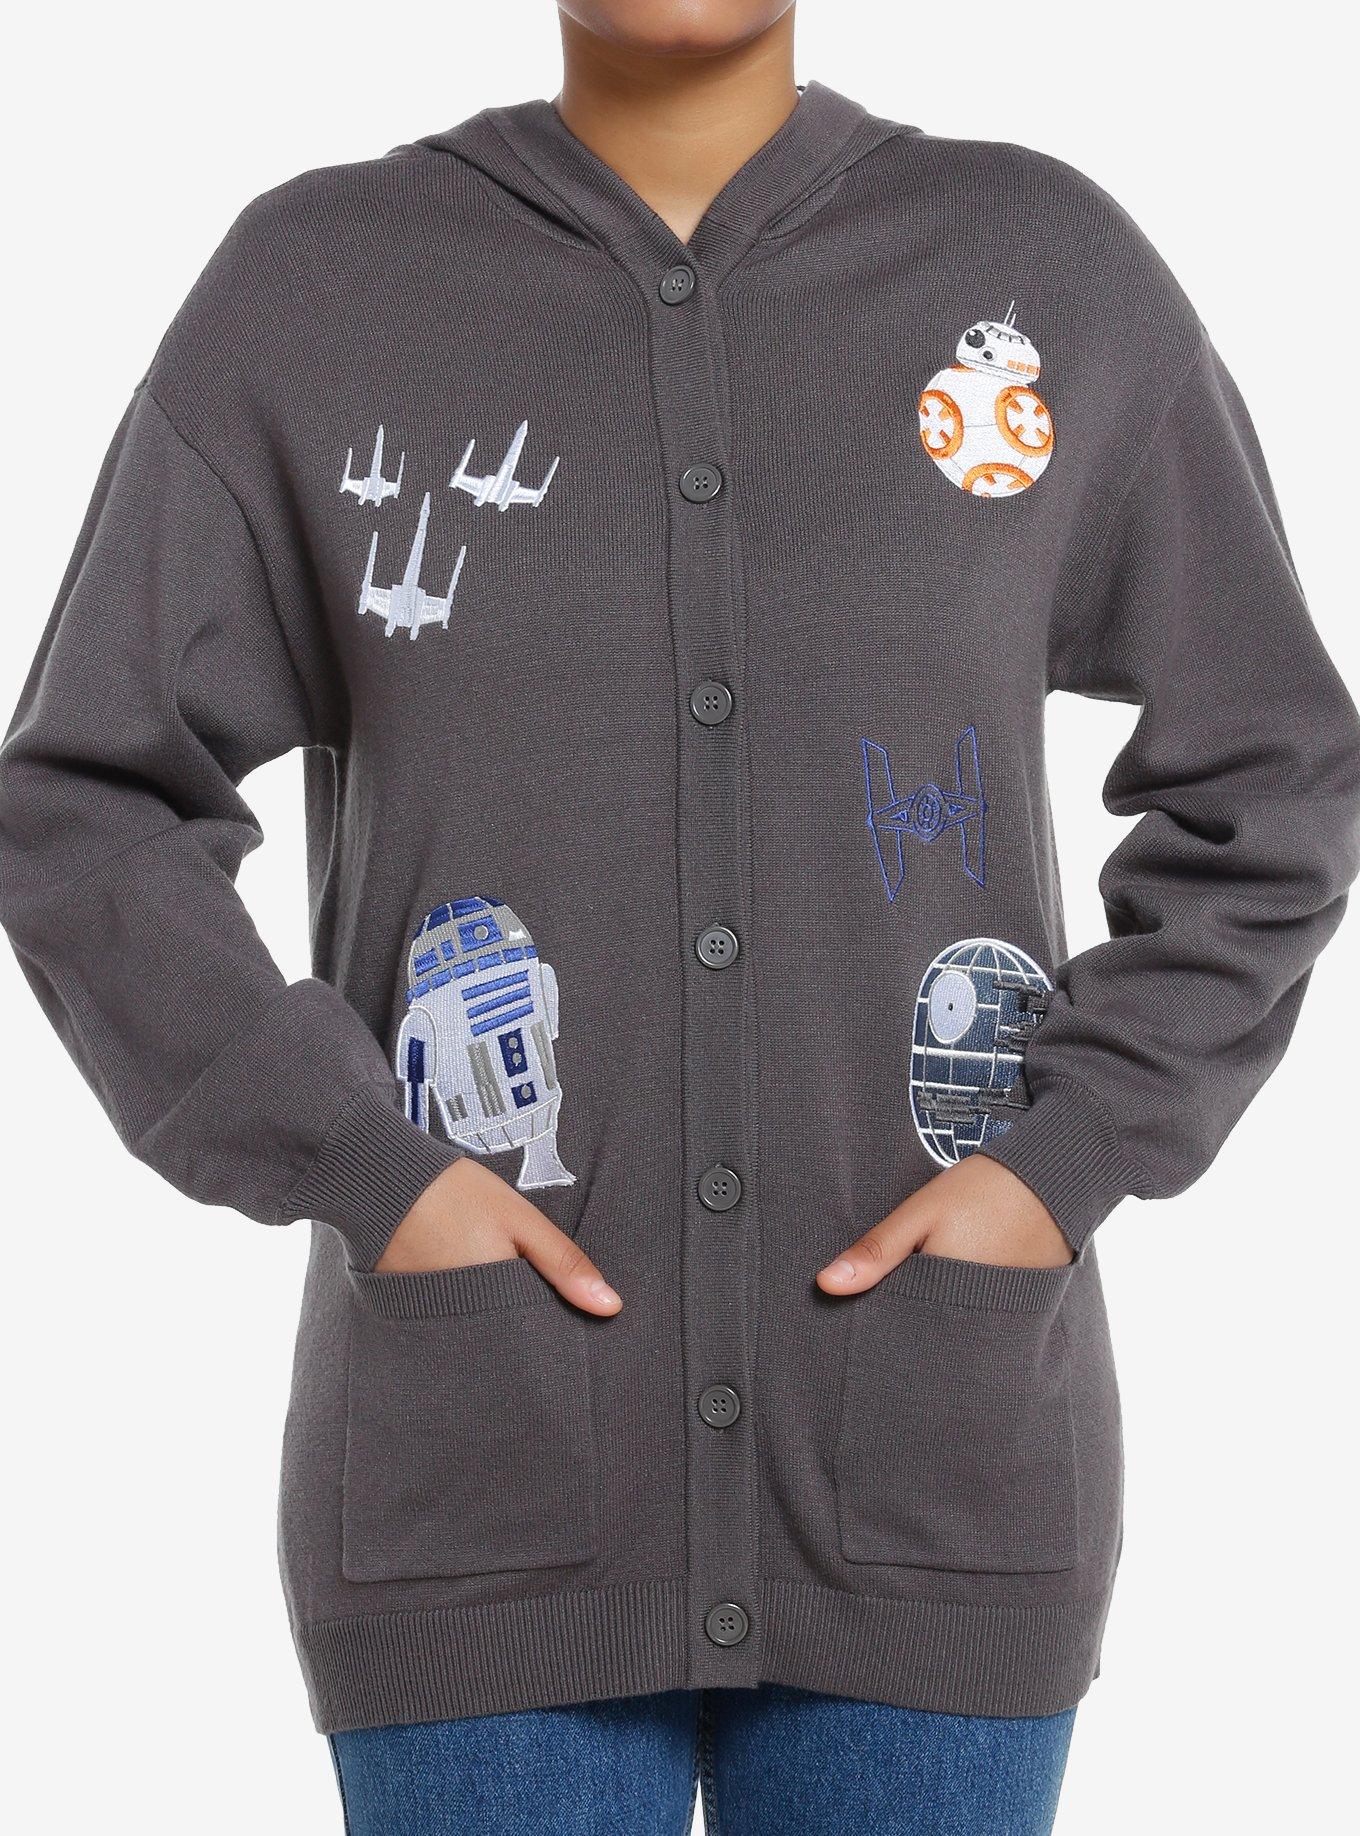 Her Universe Star Wars Droids Hooded Cardigan Her Universe Exclusive, DARK CHARCOAL, hi-res